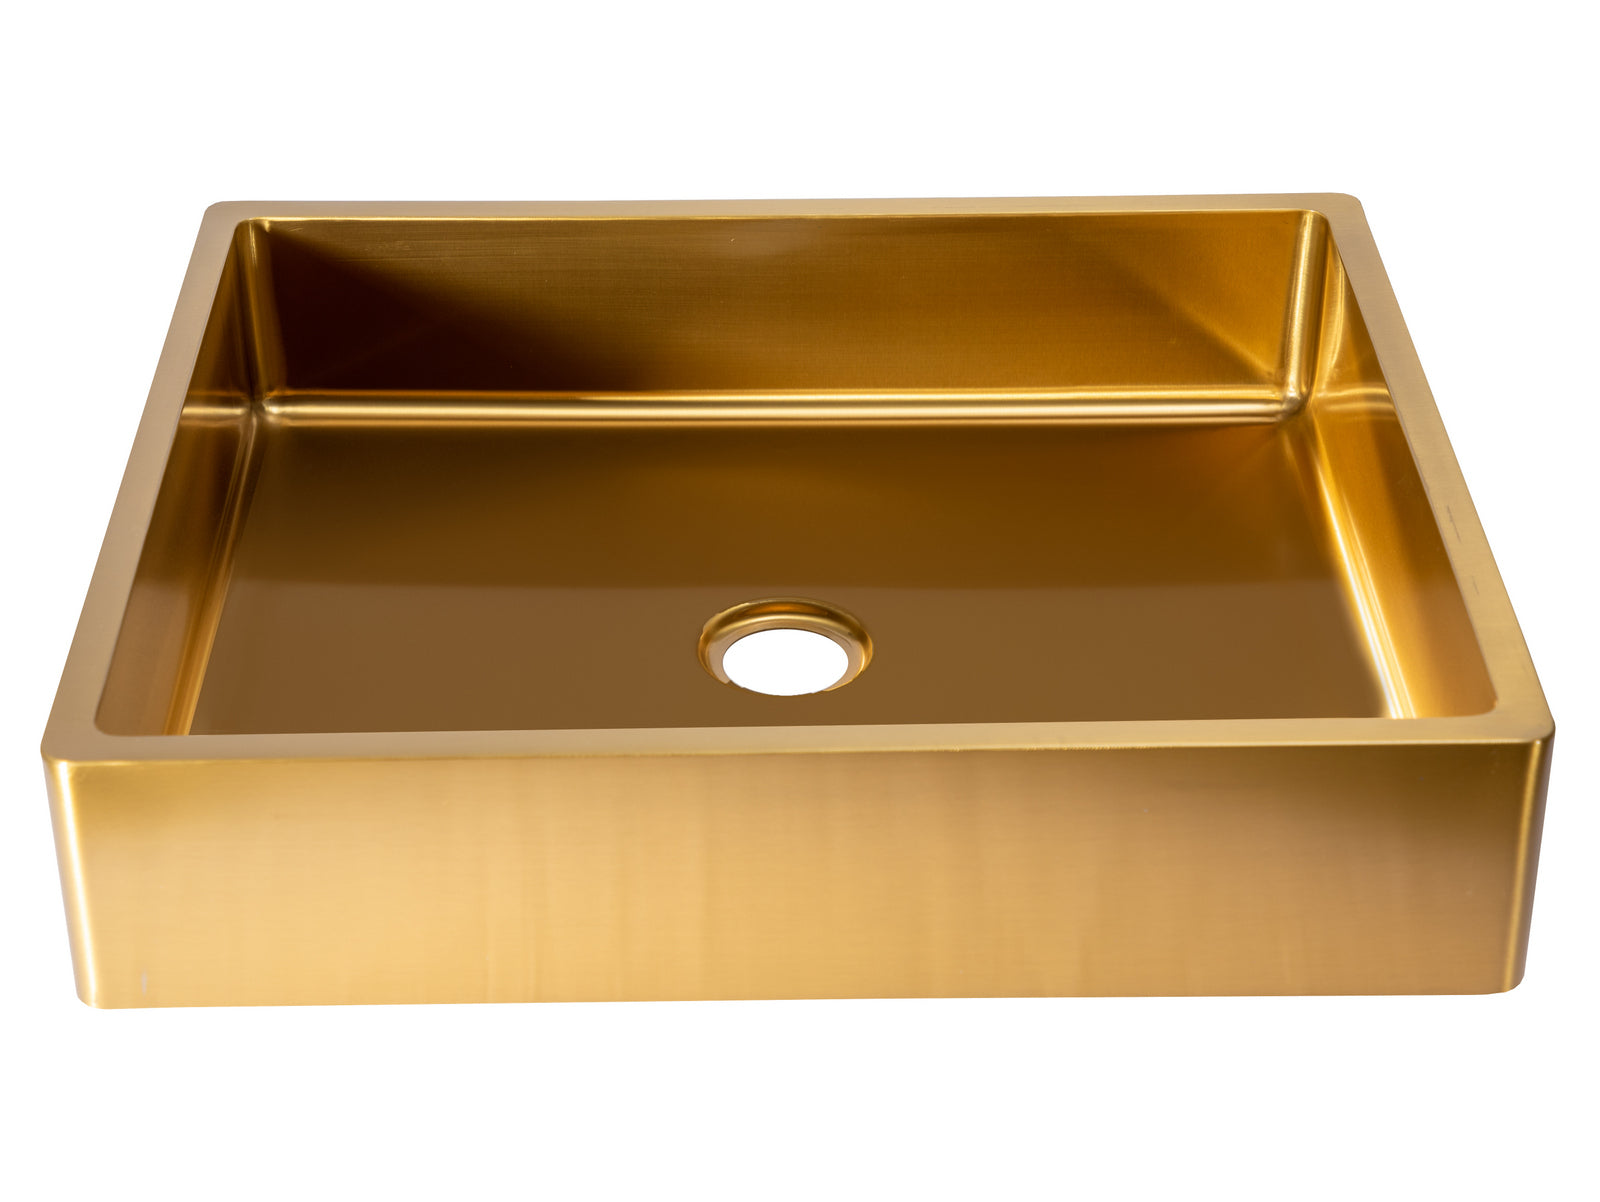 Rectangular 18 3/4" x 15 3/4" Thick Rim Stainless Steel Bathroom Vessel Sink with Drain in Gold